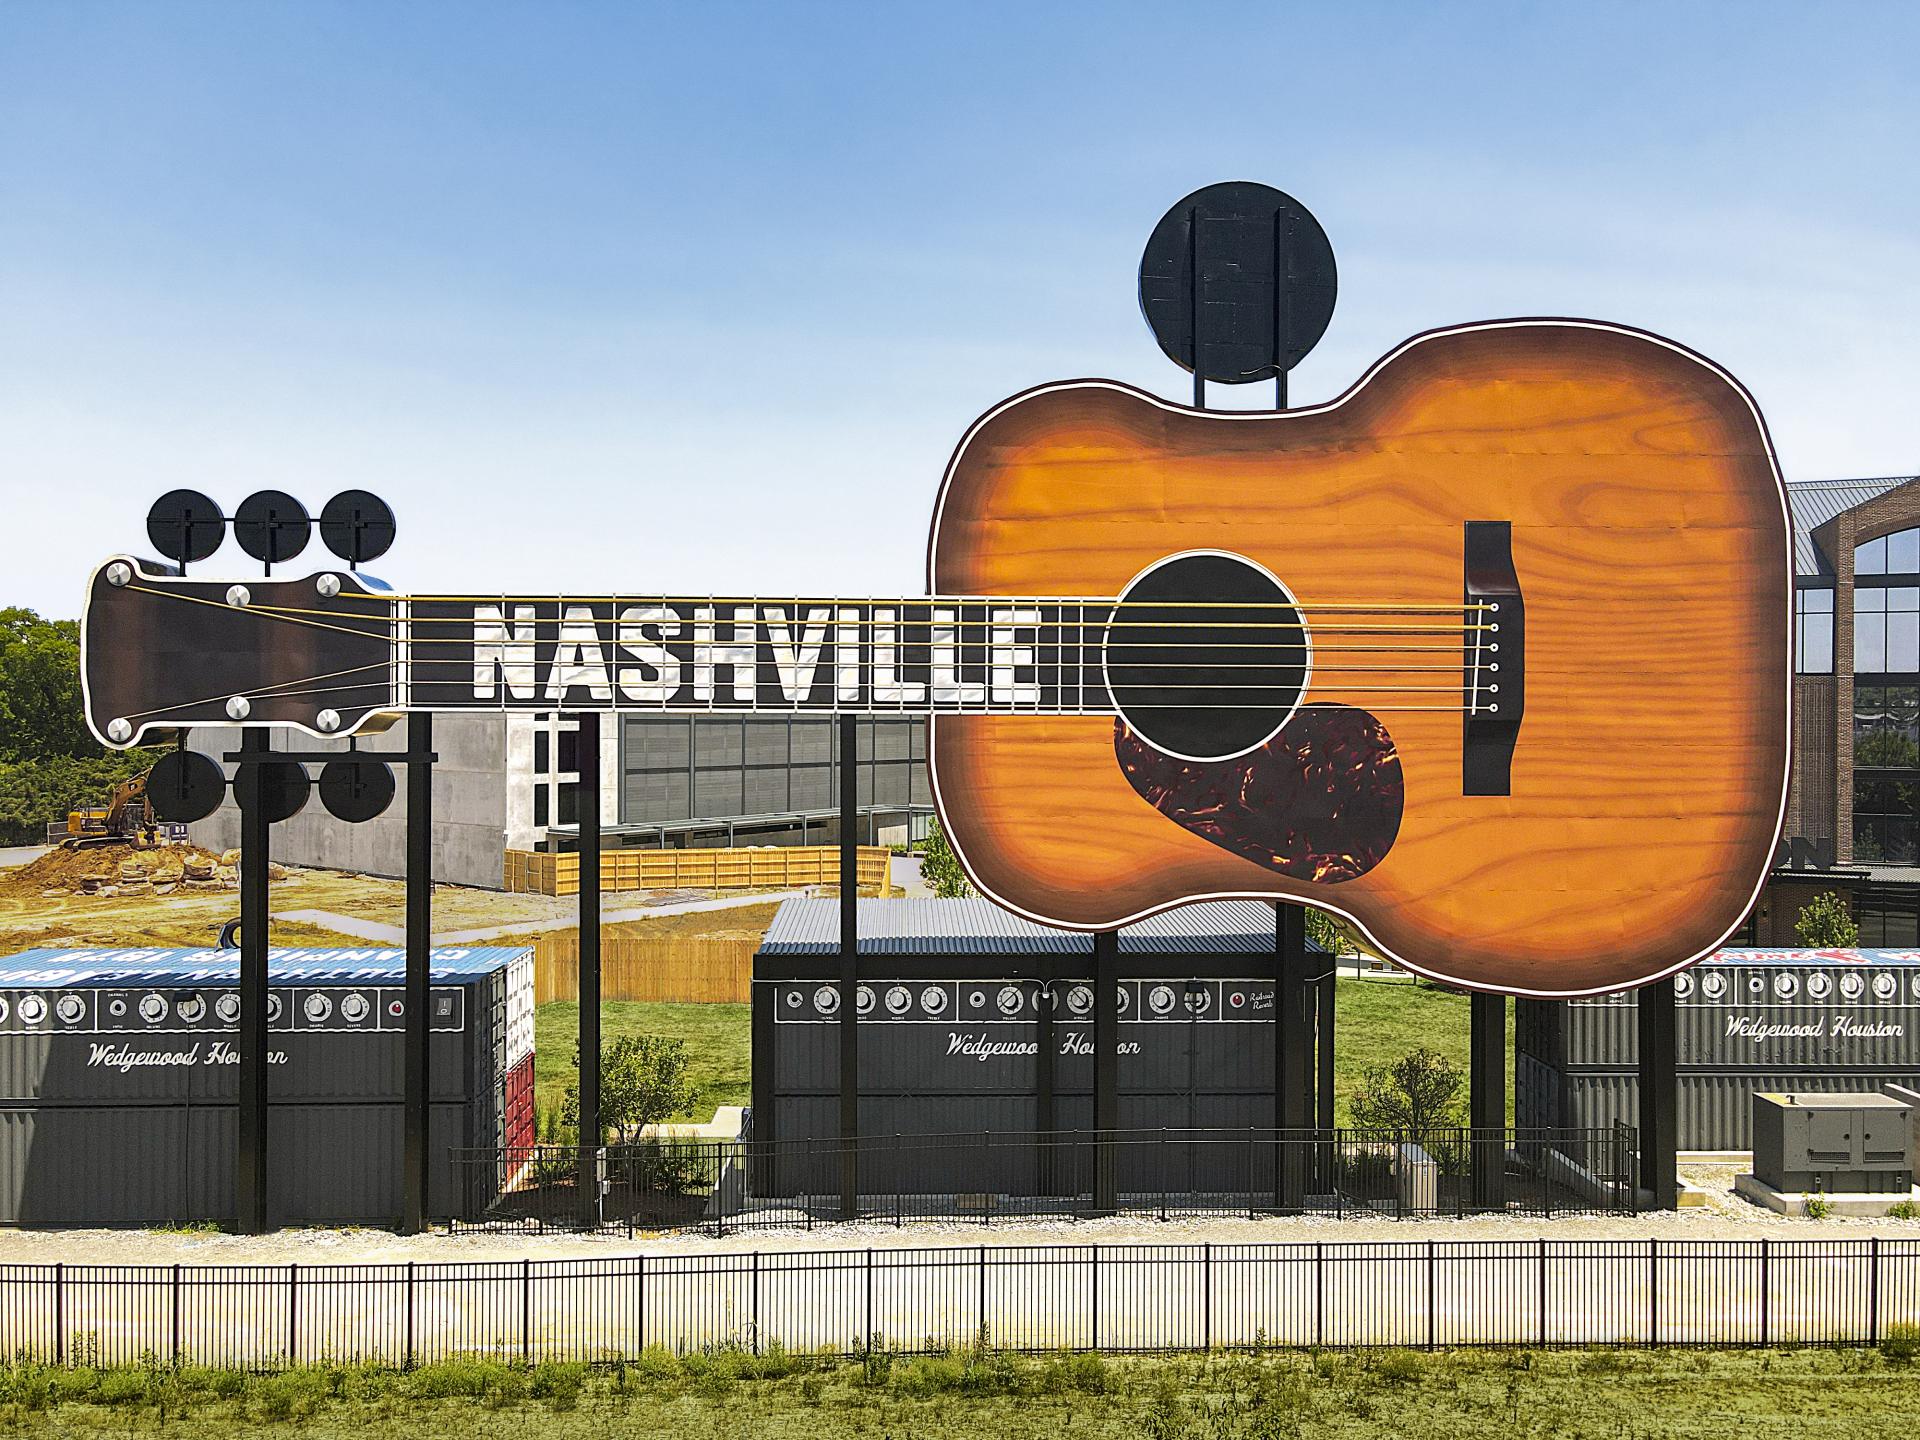 Under the iconic guitar-shaped scoreboard, The Outfield offers an acre of green space with a bandshell as an amenity to Nashville Warehouse Co. tenants and to the broader community